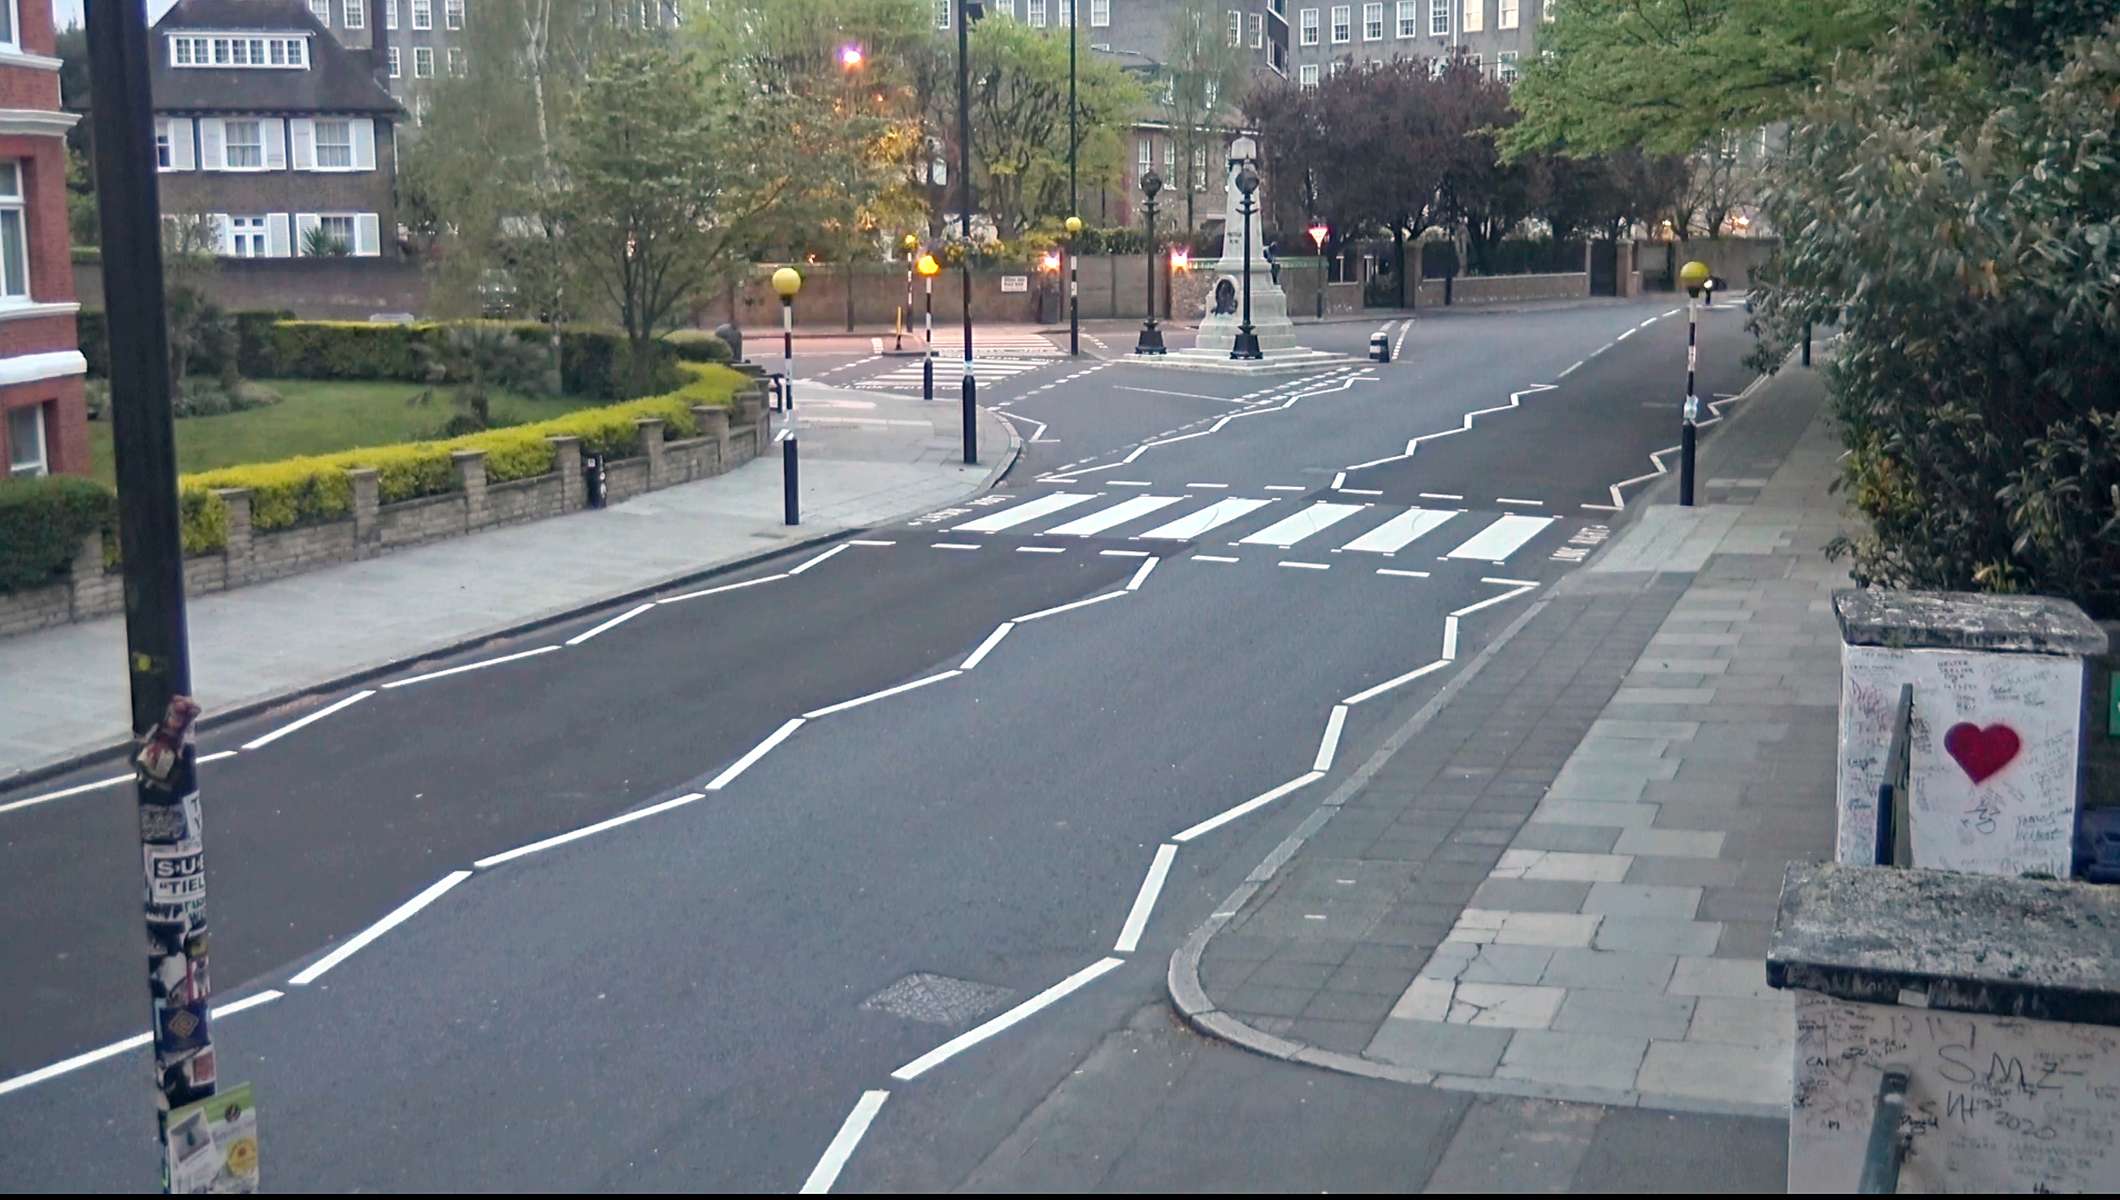 Abby Road, London, England. April 12, 2020, 10:00:39 PM PST